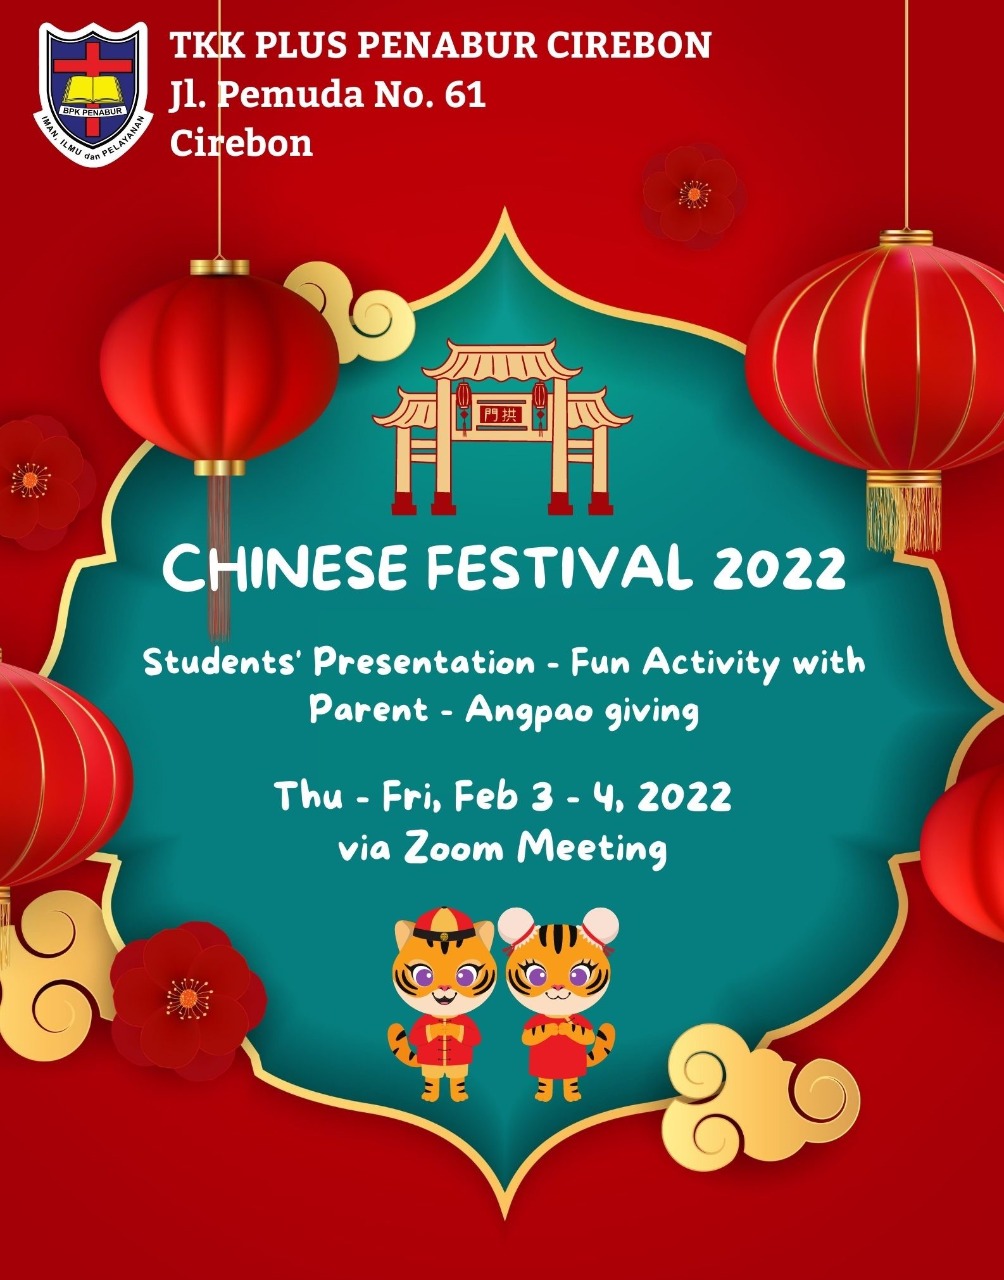 Chinese Festival 2022